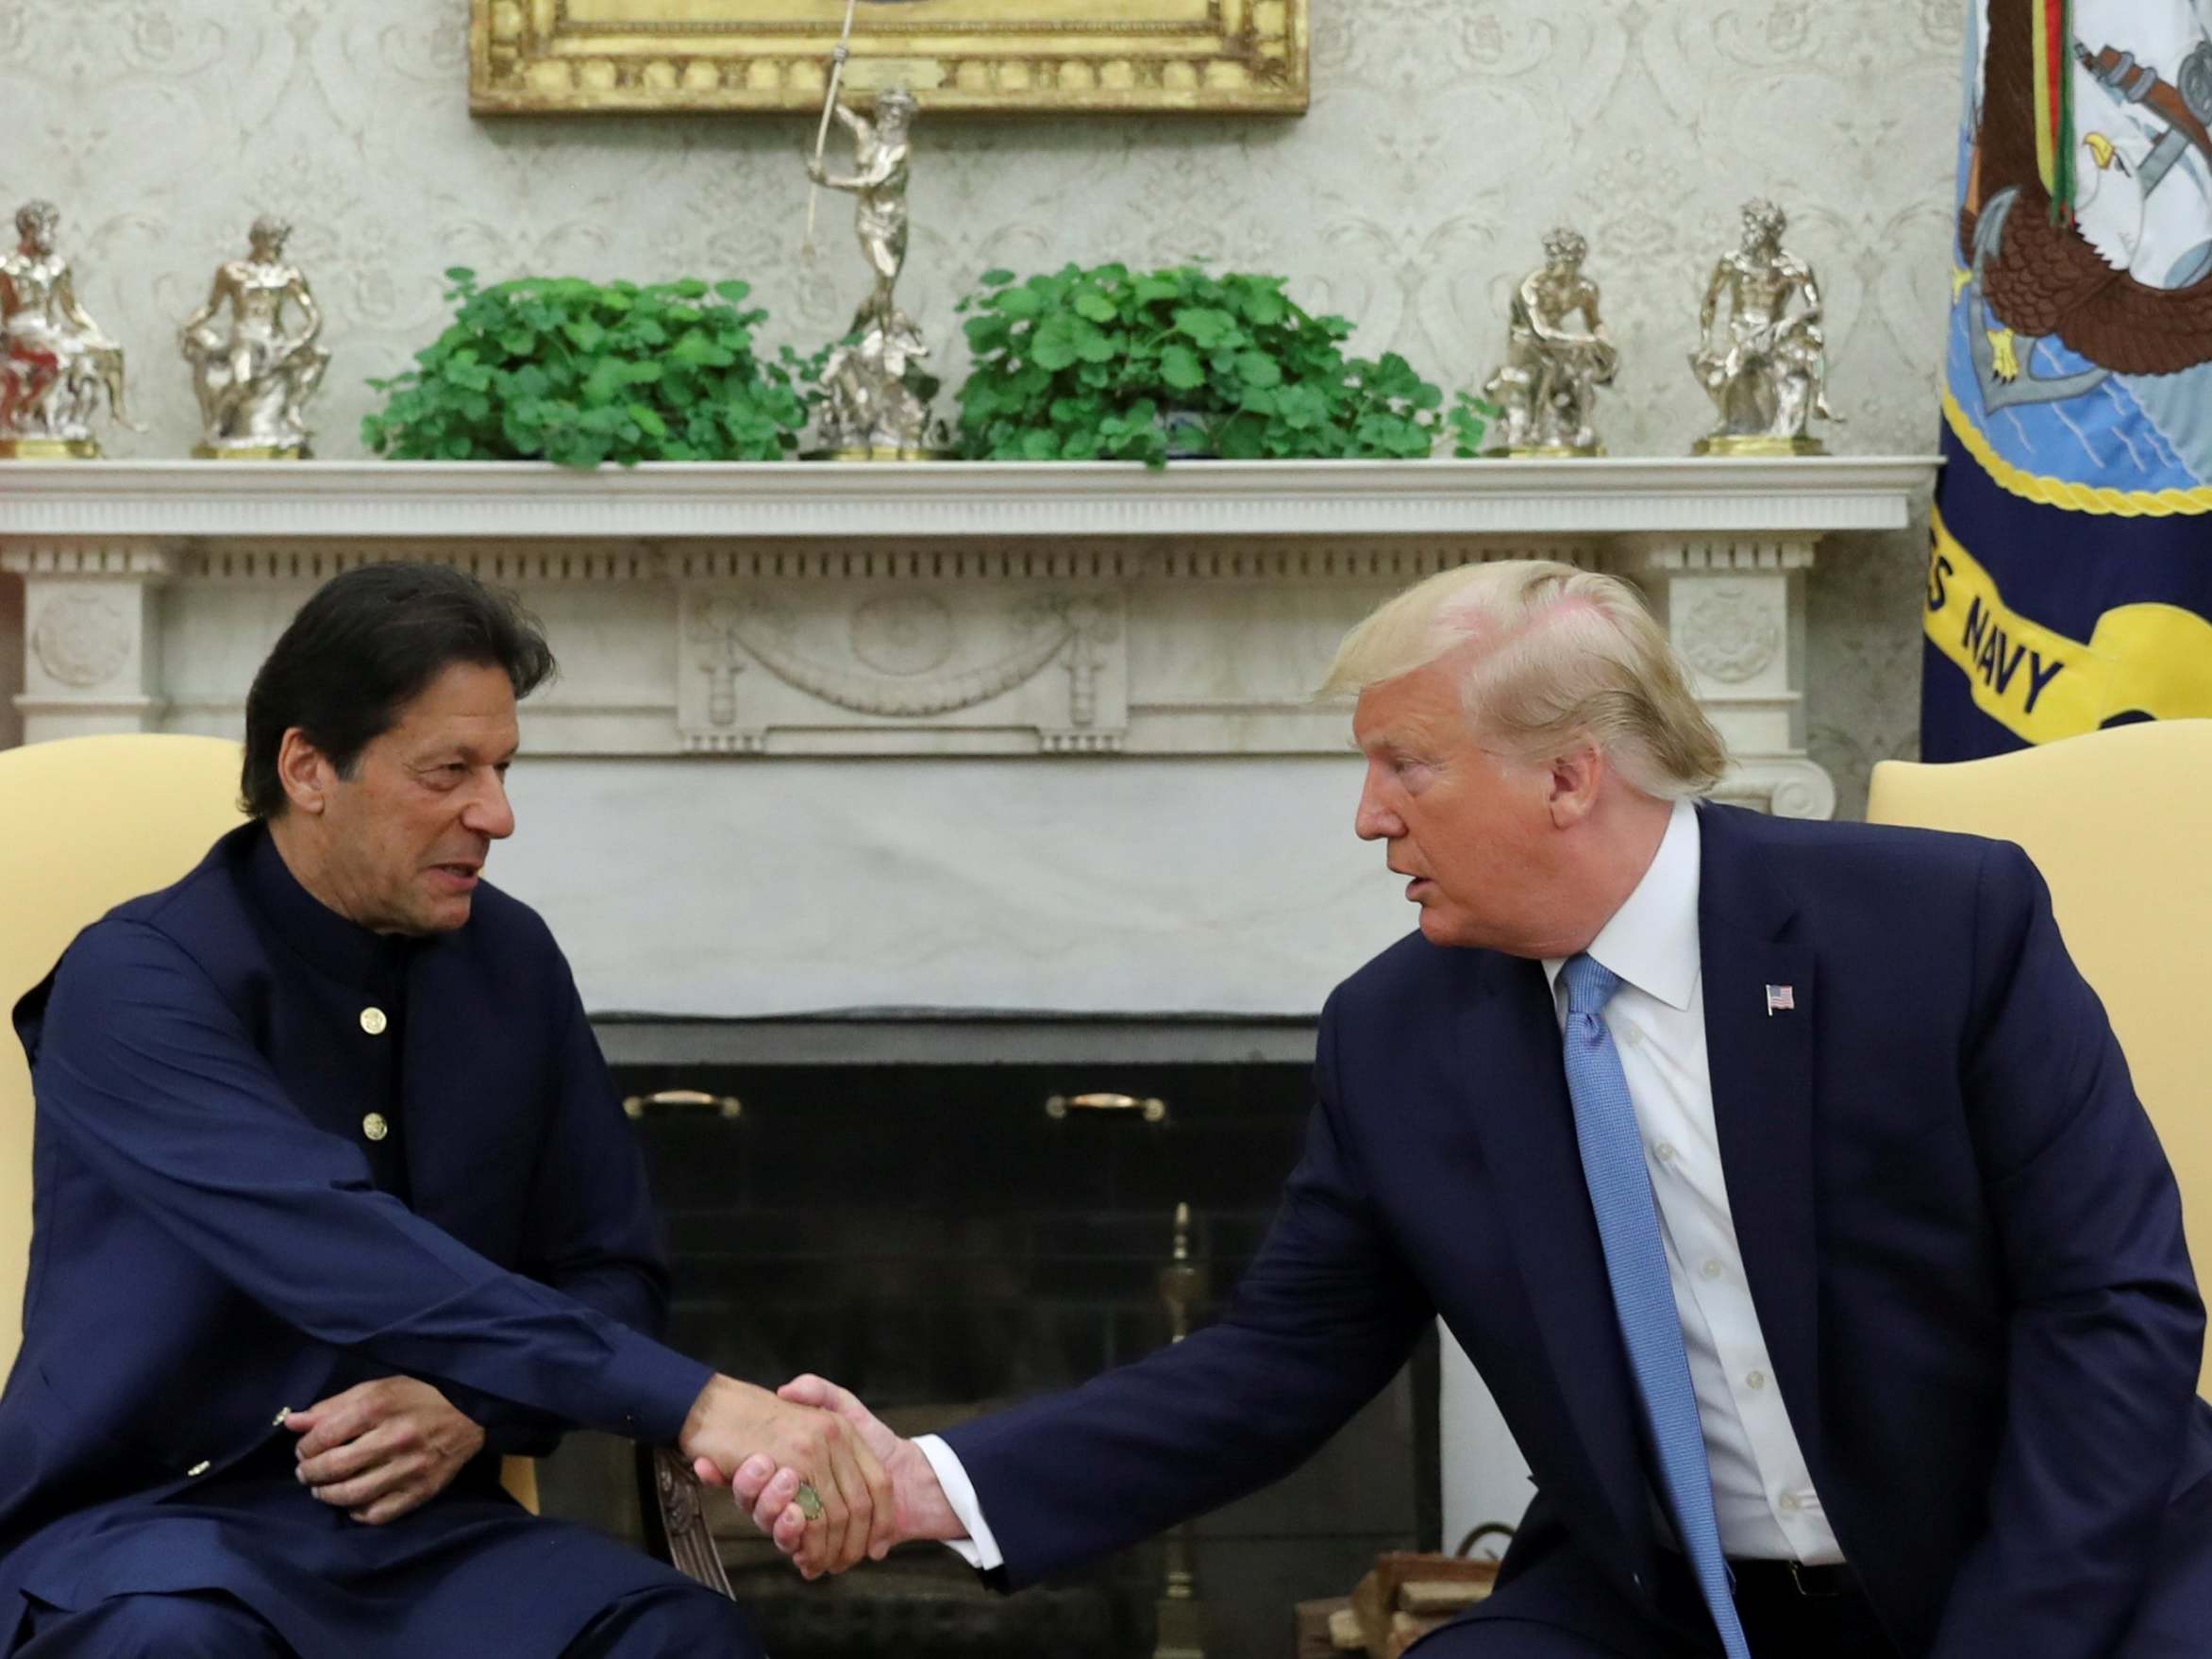 Imran Khan has been asked to intervene by Donald Trump